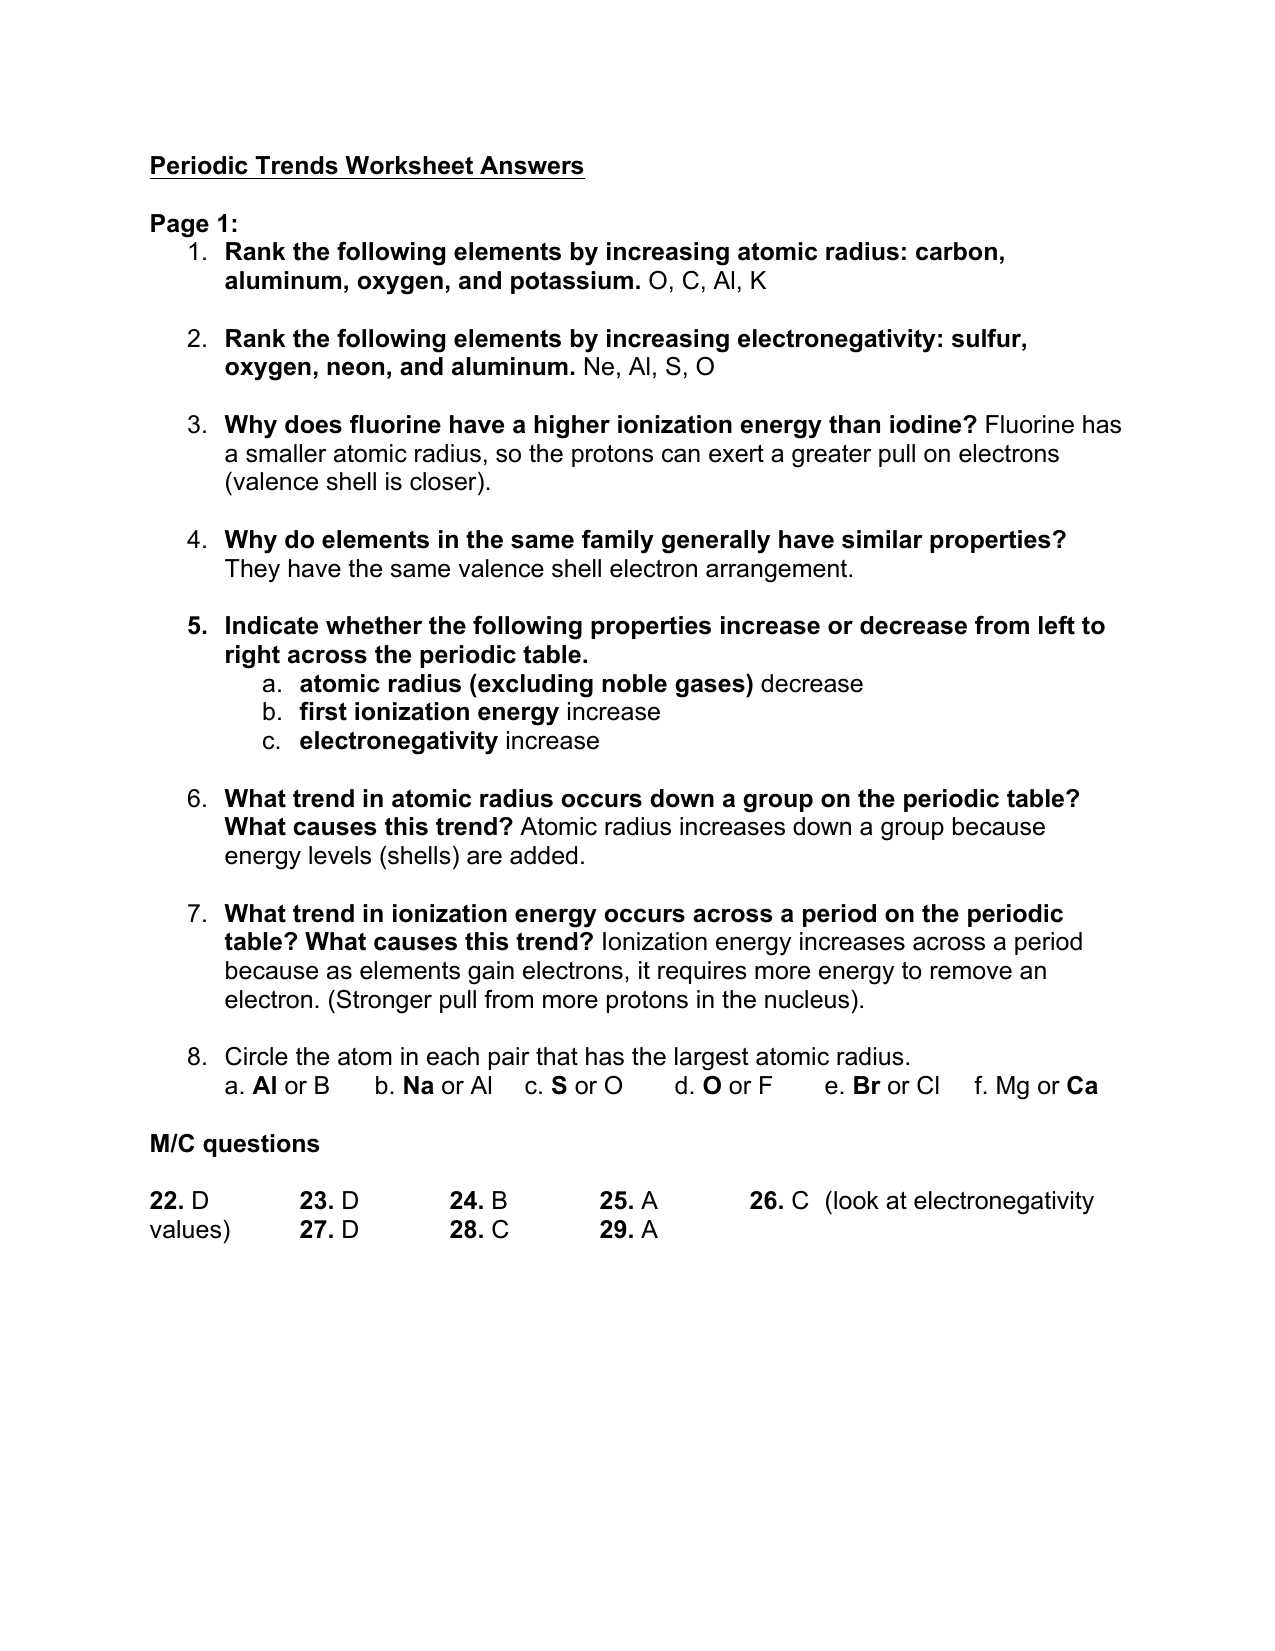 Types Of Chemical Reactions Worksheet Answers Along with Answers to Periodic Trends Worksheet Name 5 Date F Cadrecorner